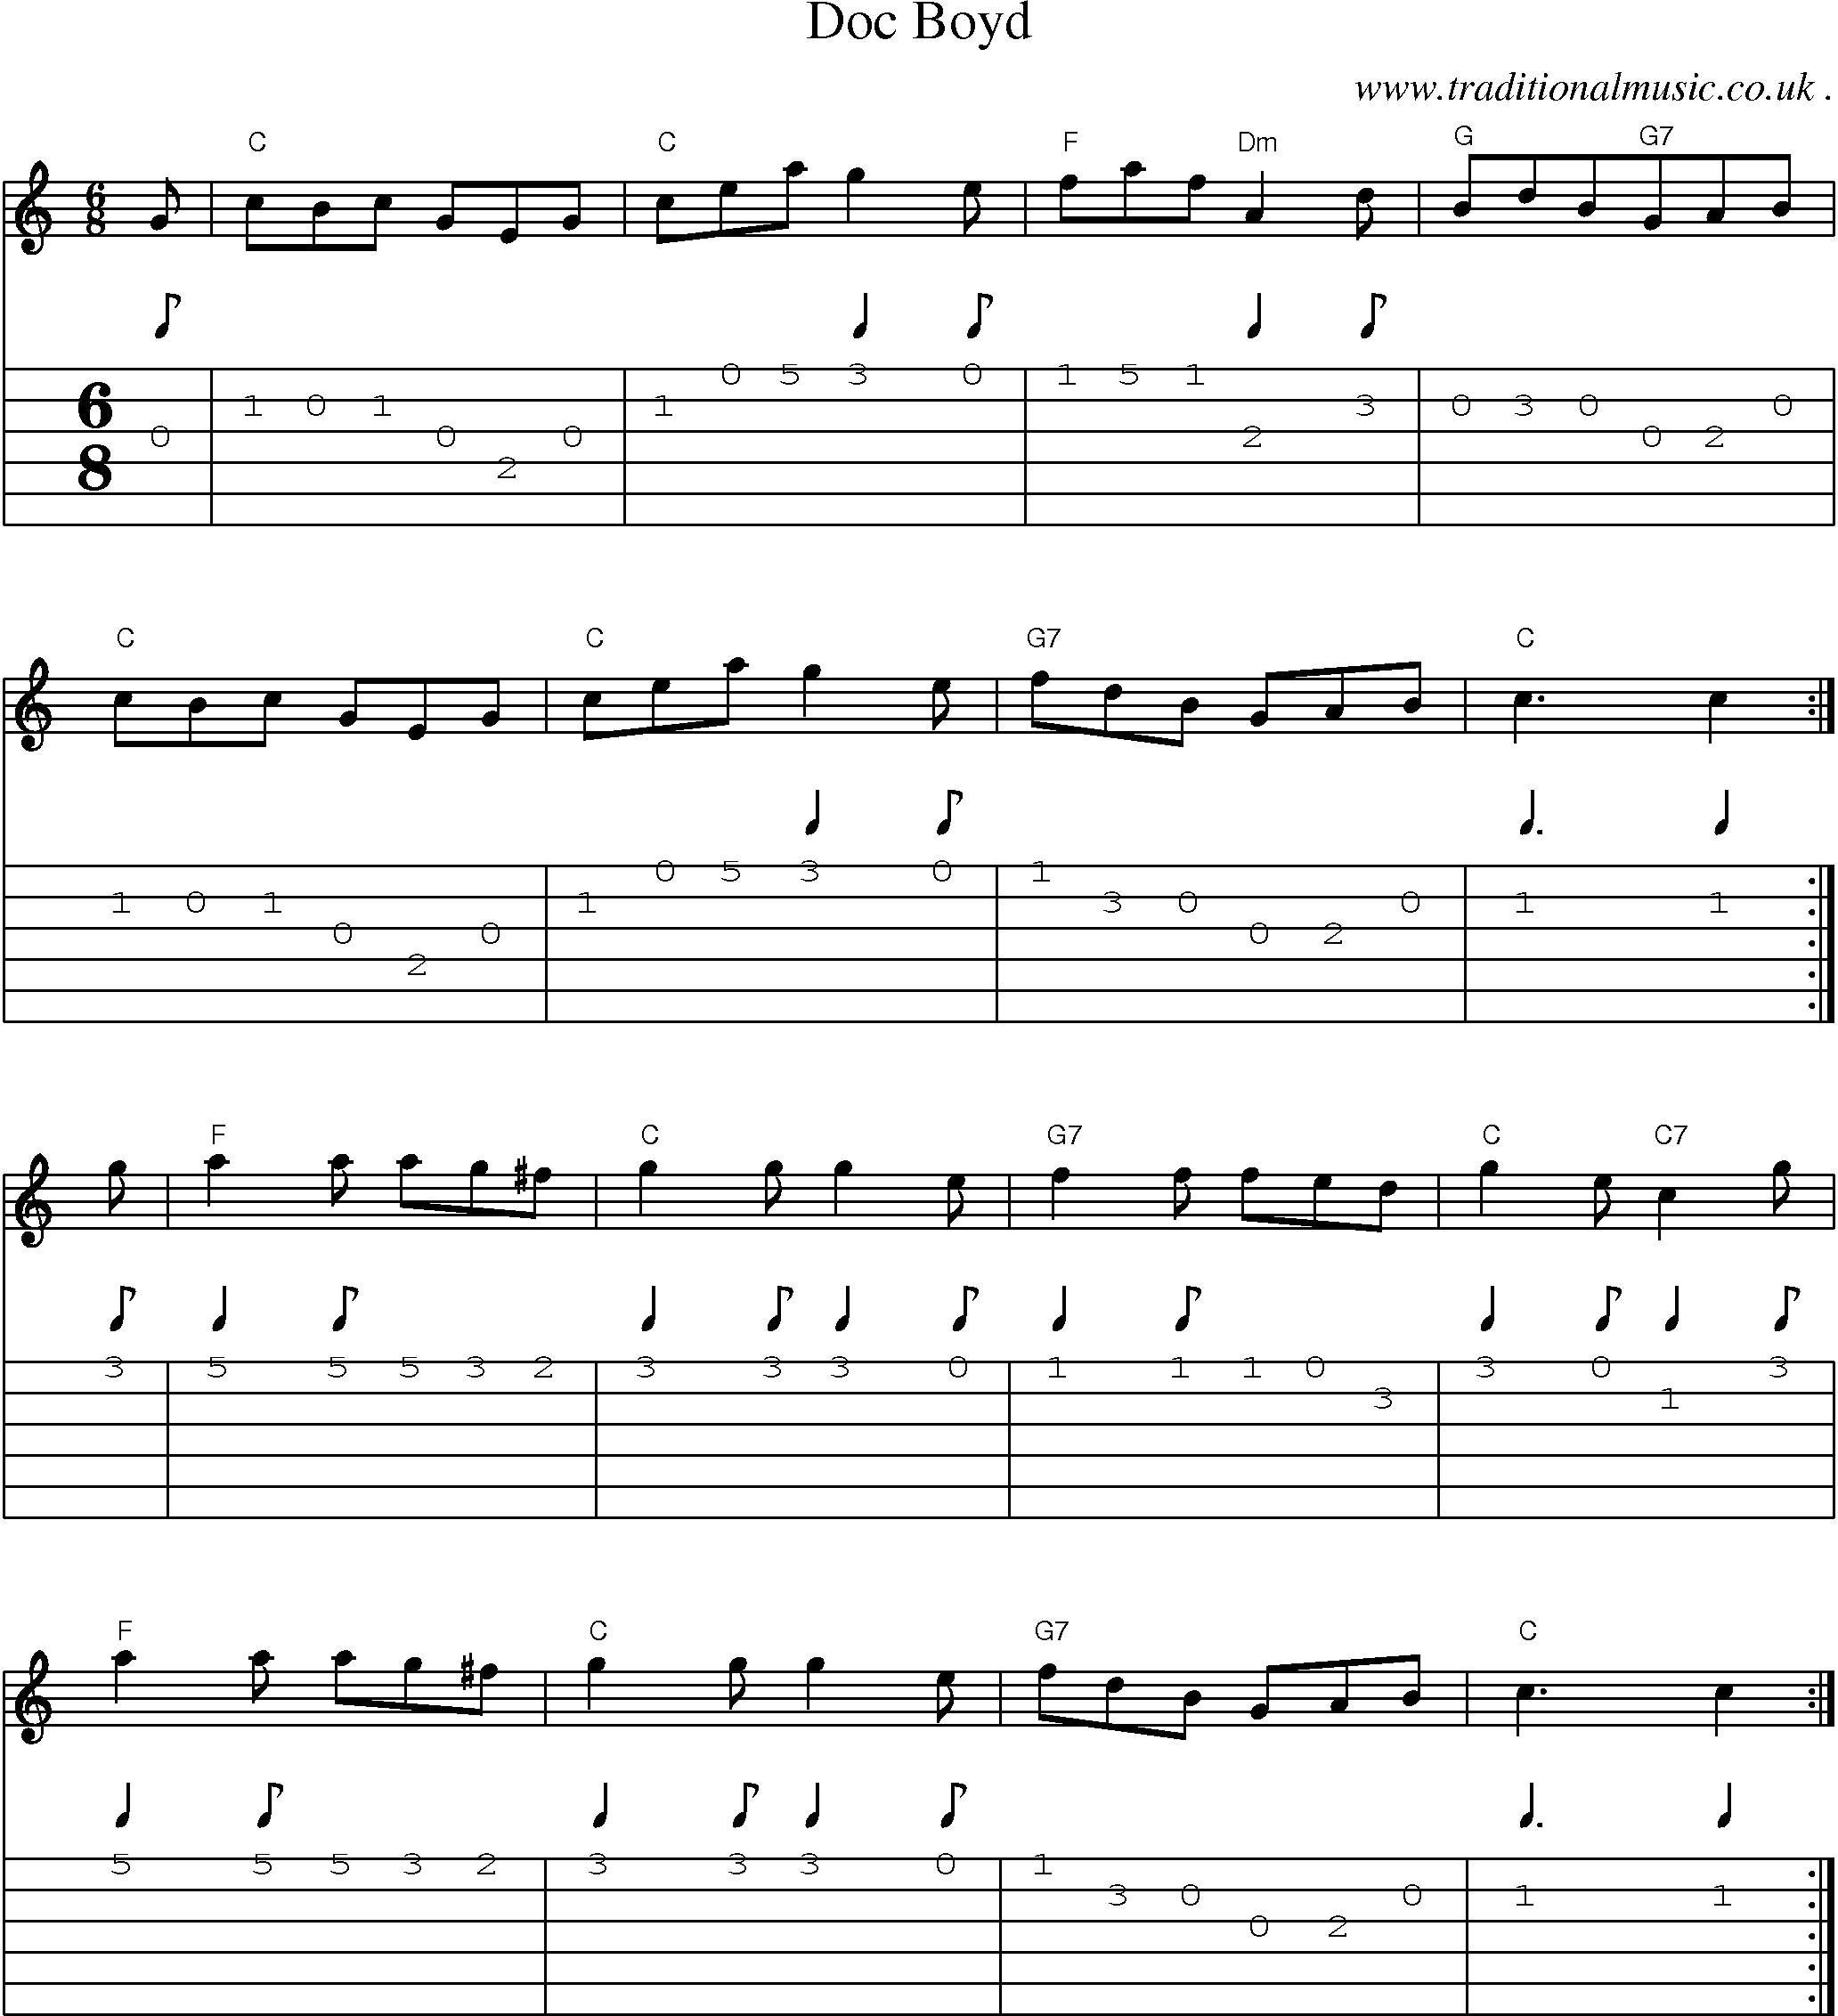 Sheet-Music and Guitar Tabs for Doc Boyd